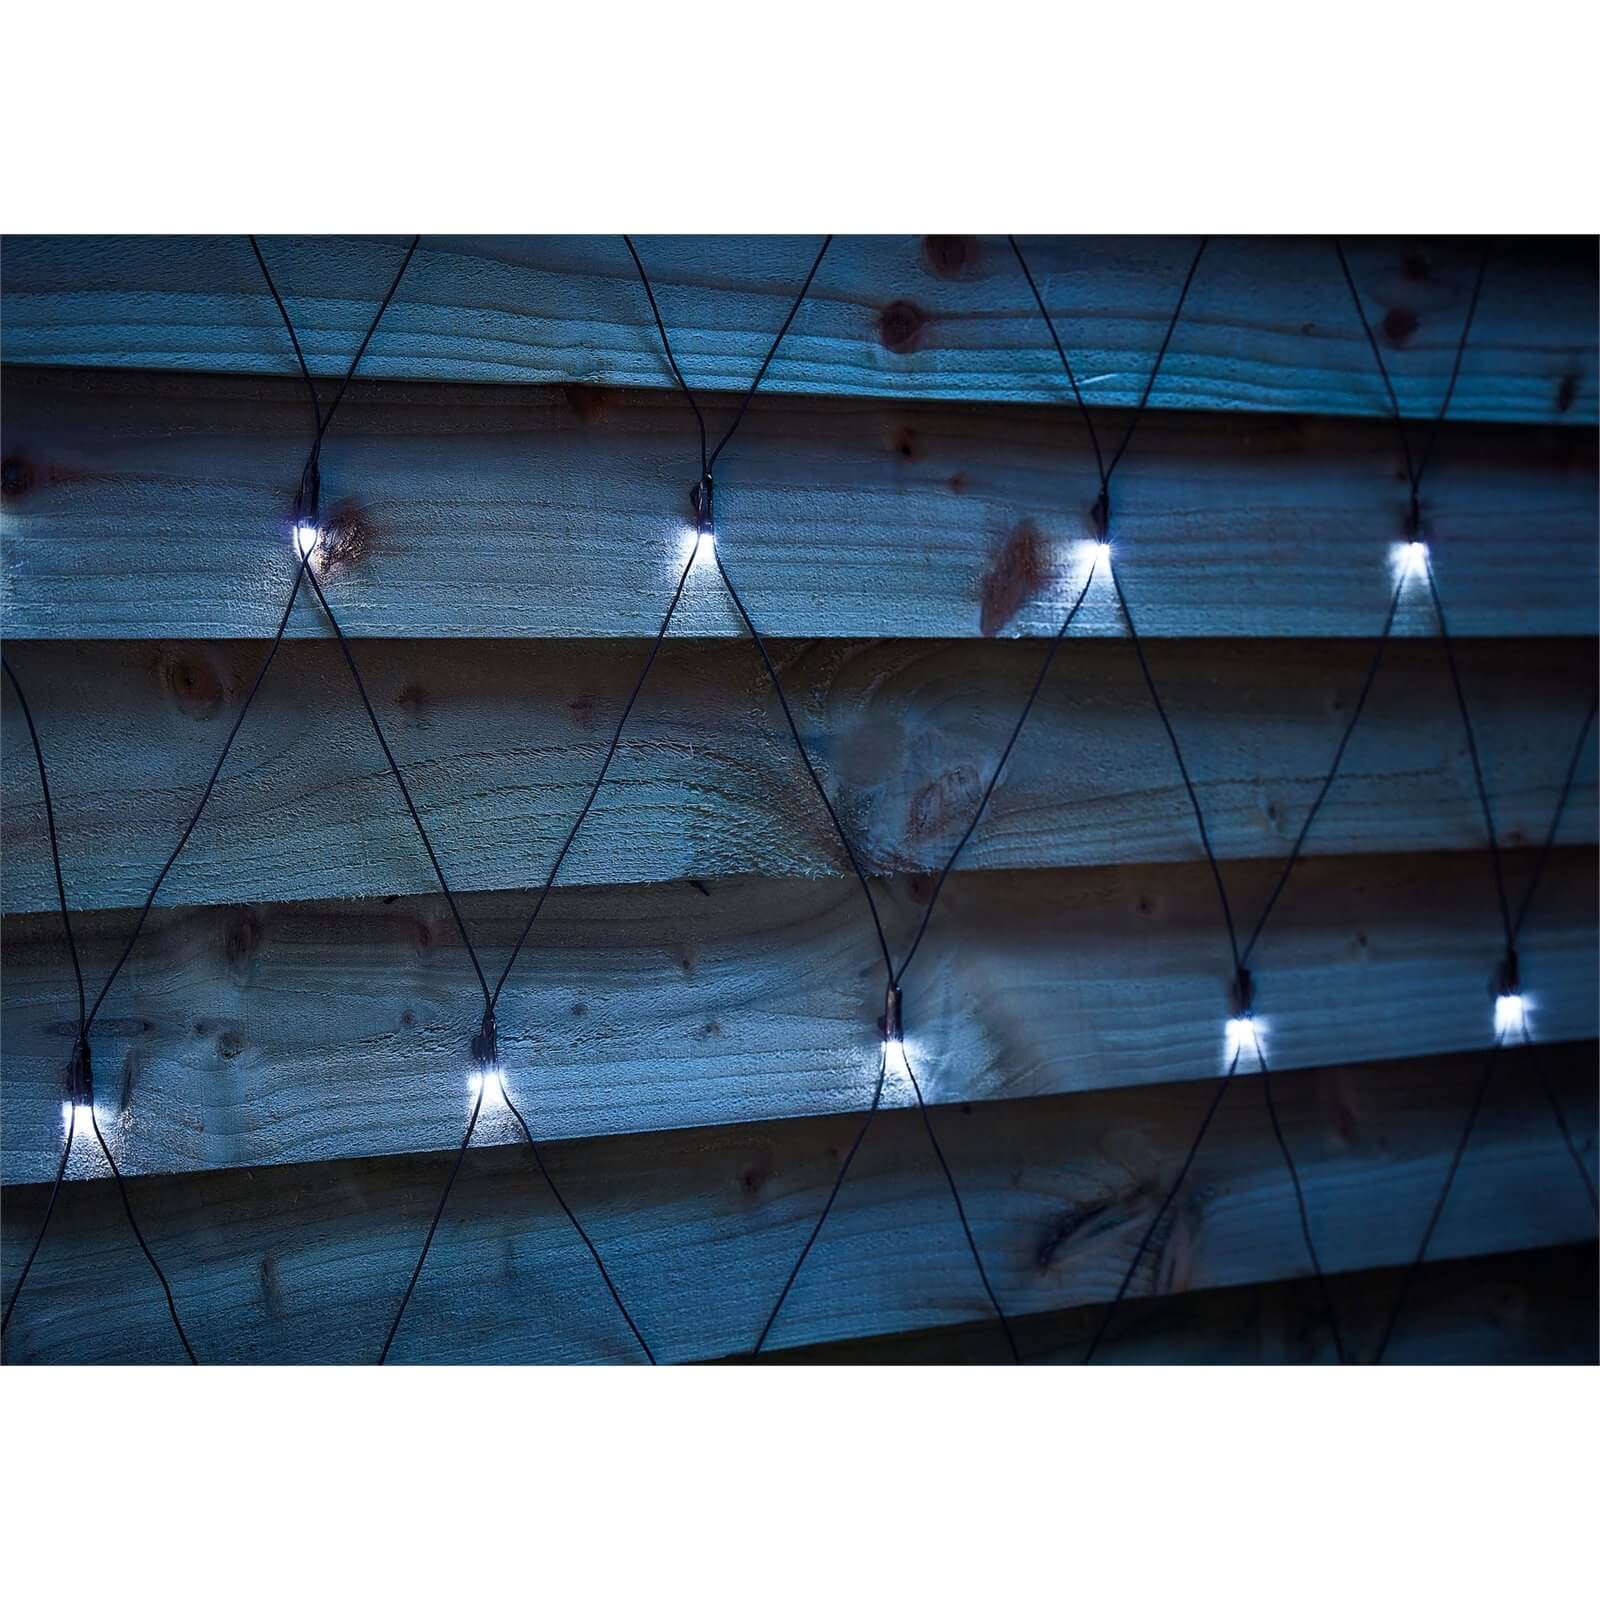 2 x 1m LED Timer Net Outdoor Light - Bright White (Battery Operated)